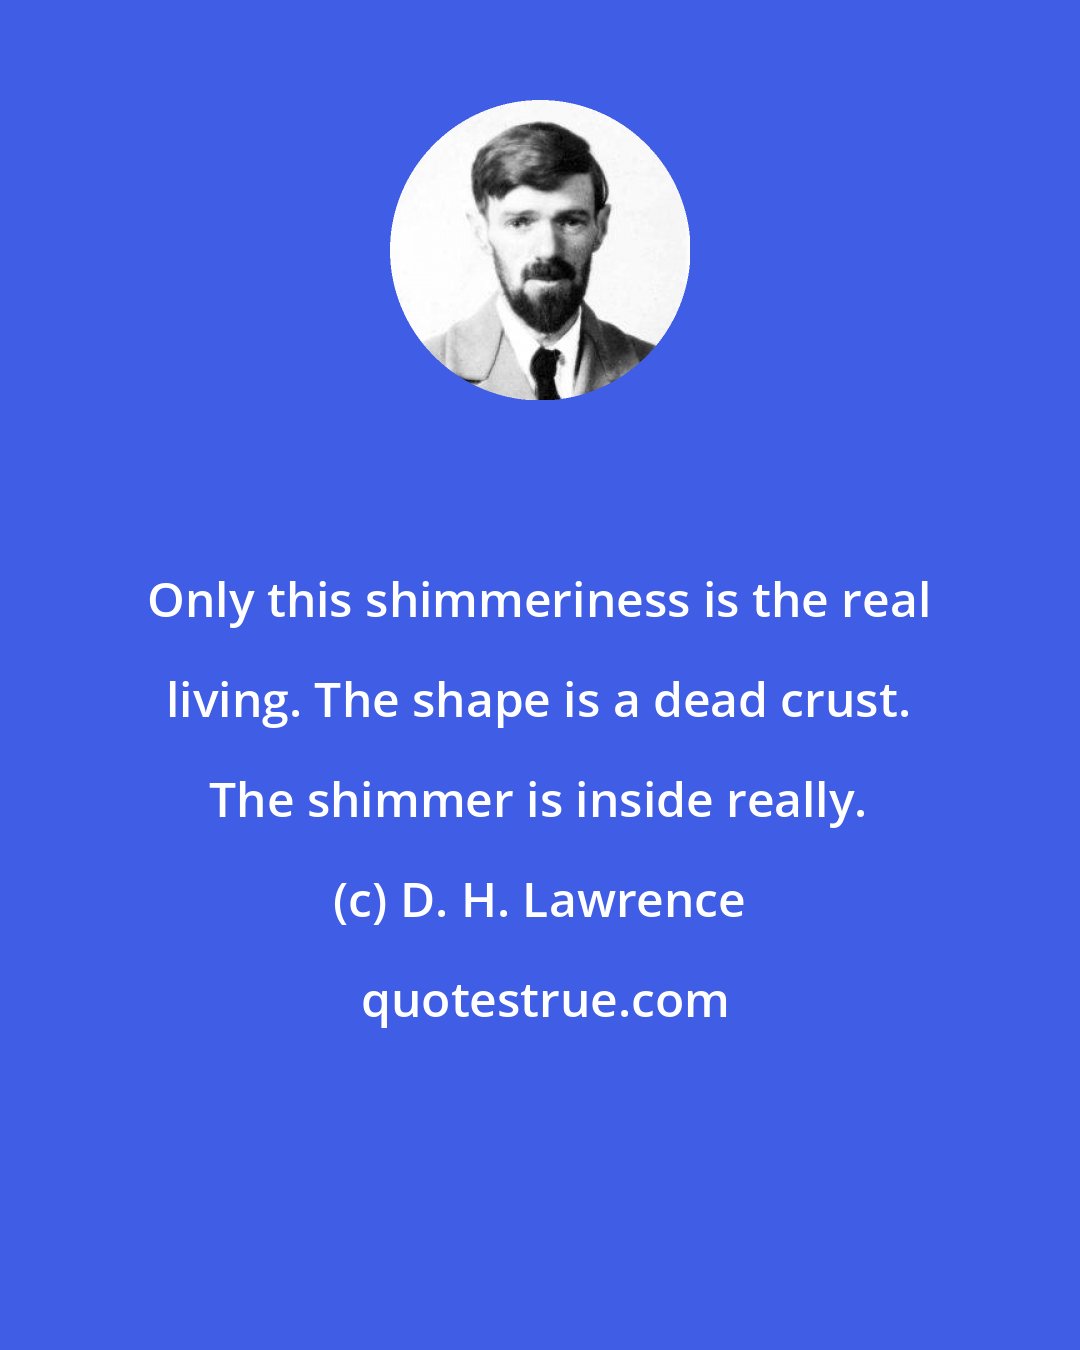 D. H. Lawrence: Only this shimmeriness is the real living. The shape is a dead crust. The shimmer is inside really.